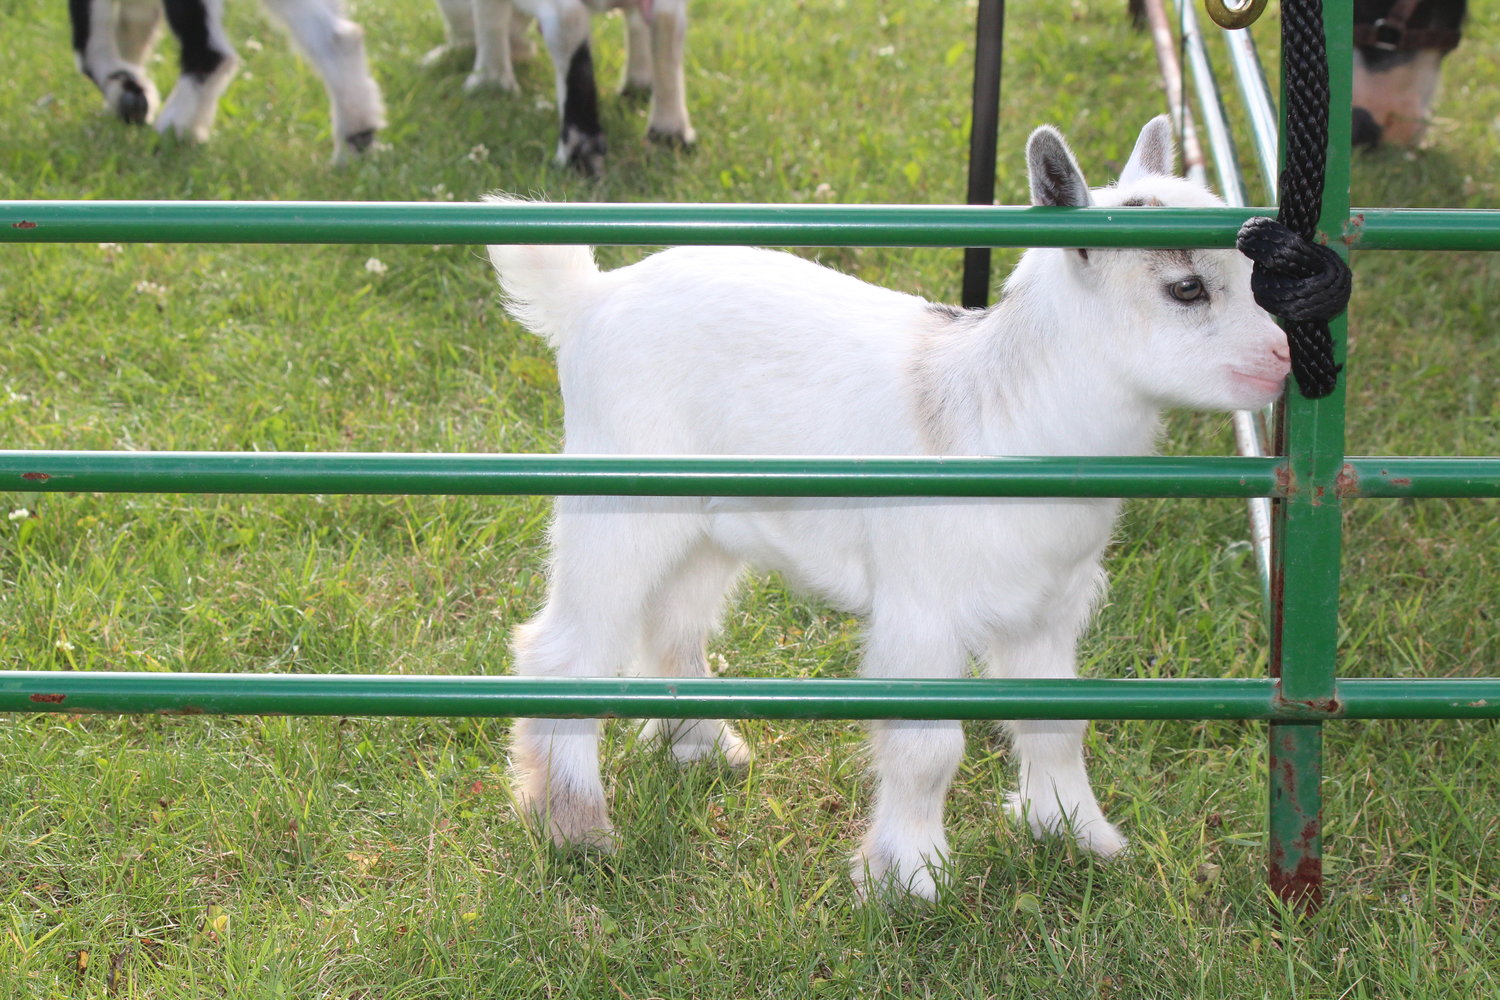 Baby goats pranced in their pen.